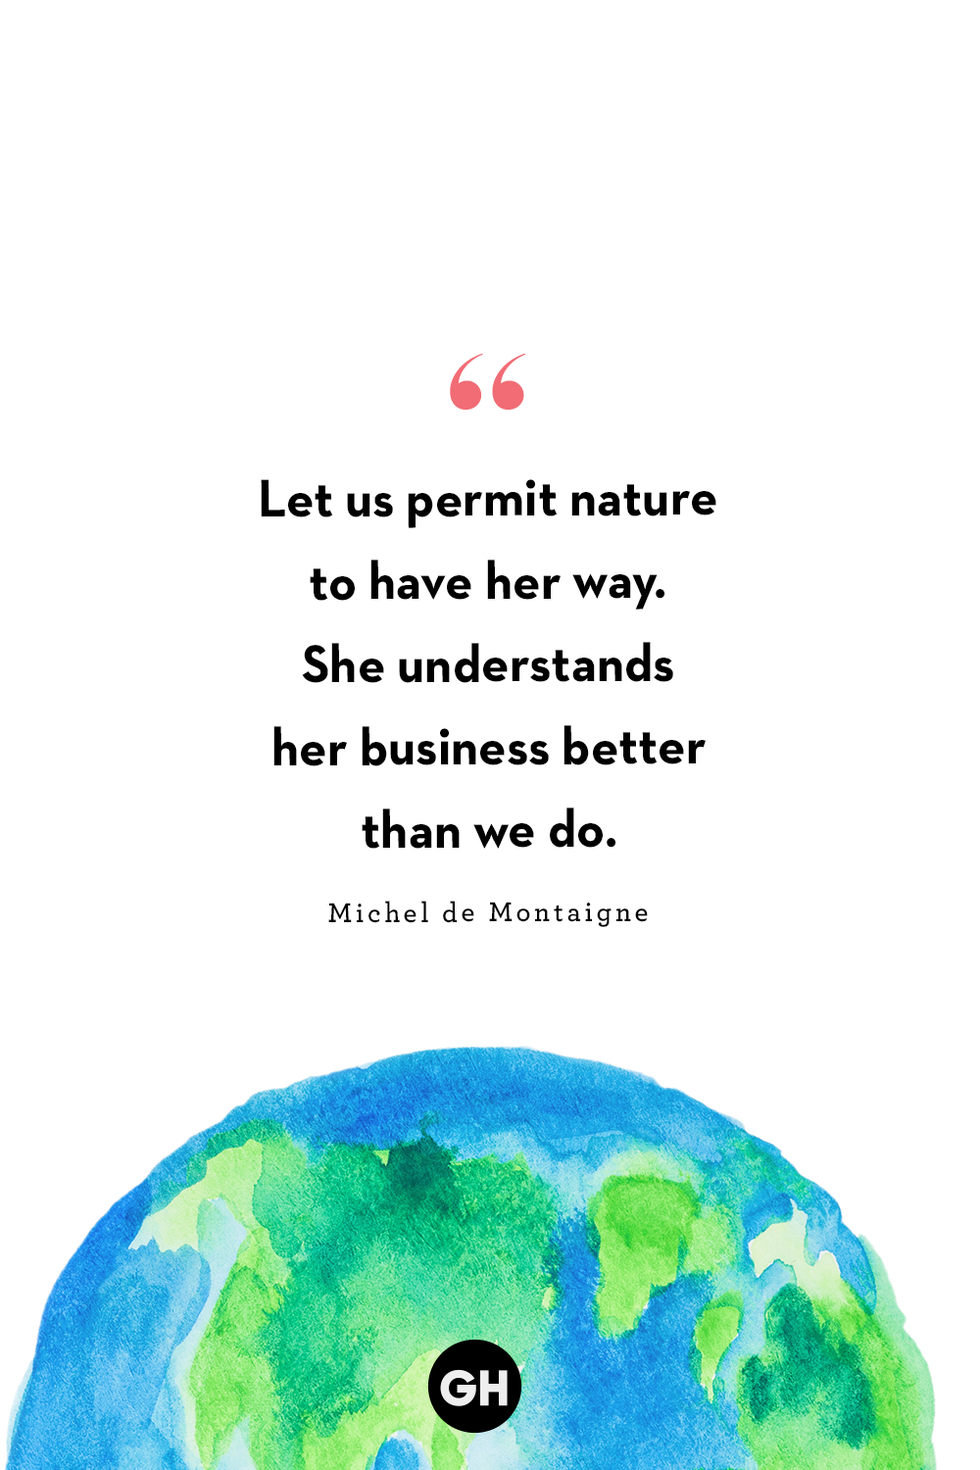 40 Best Earth Day Quotes 2023 - Short Slogans About Saving the Environment